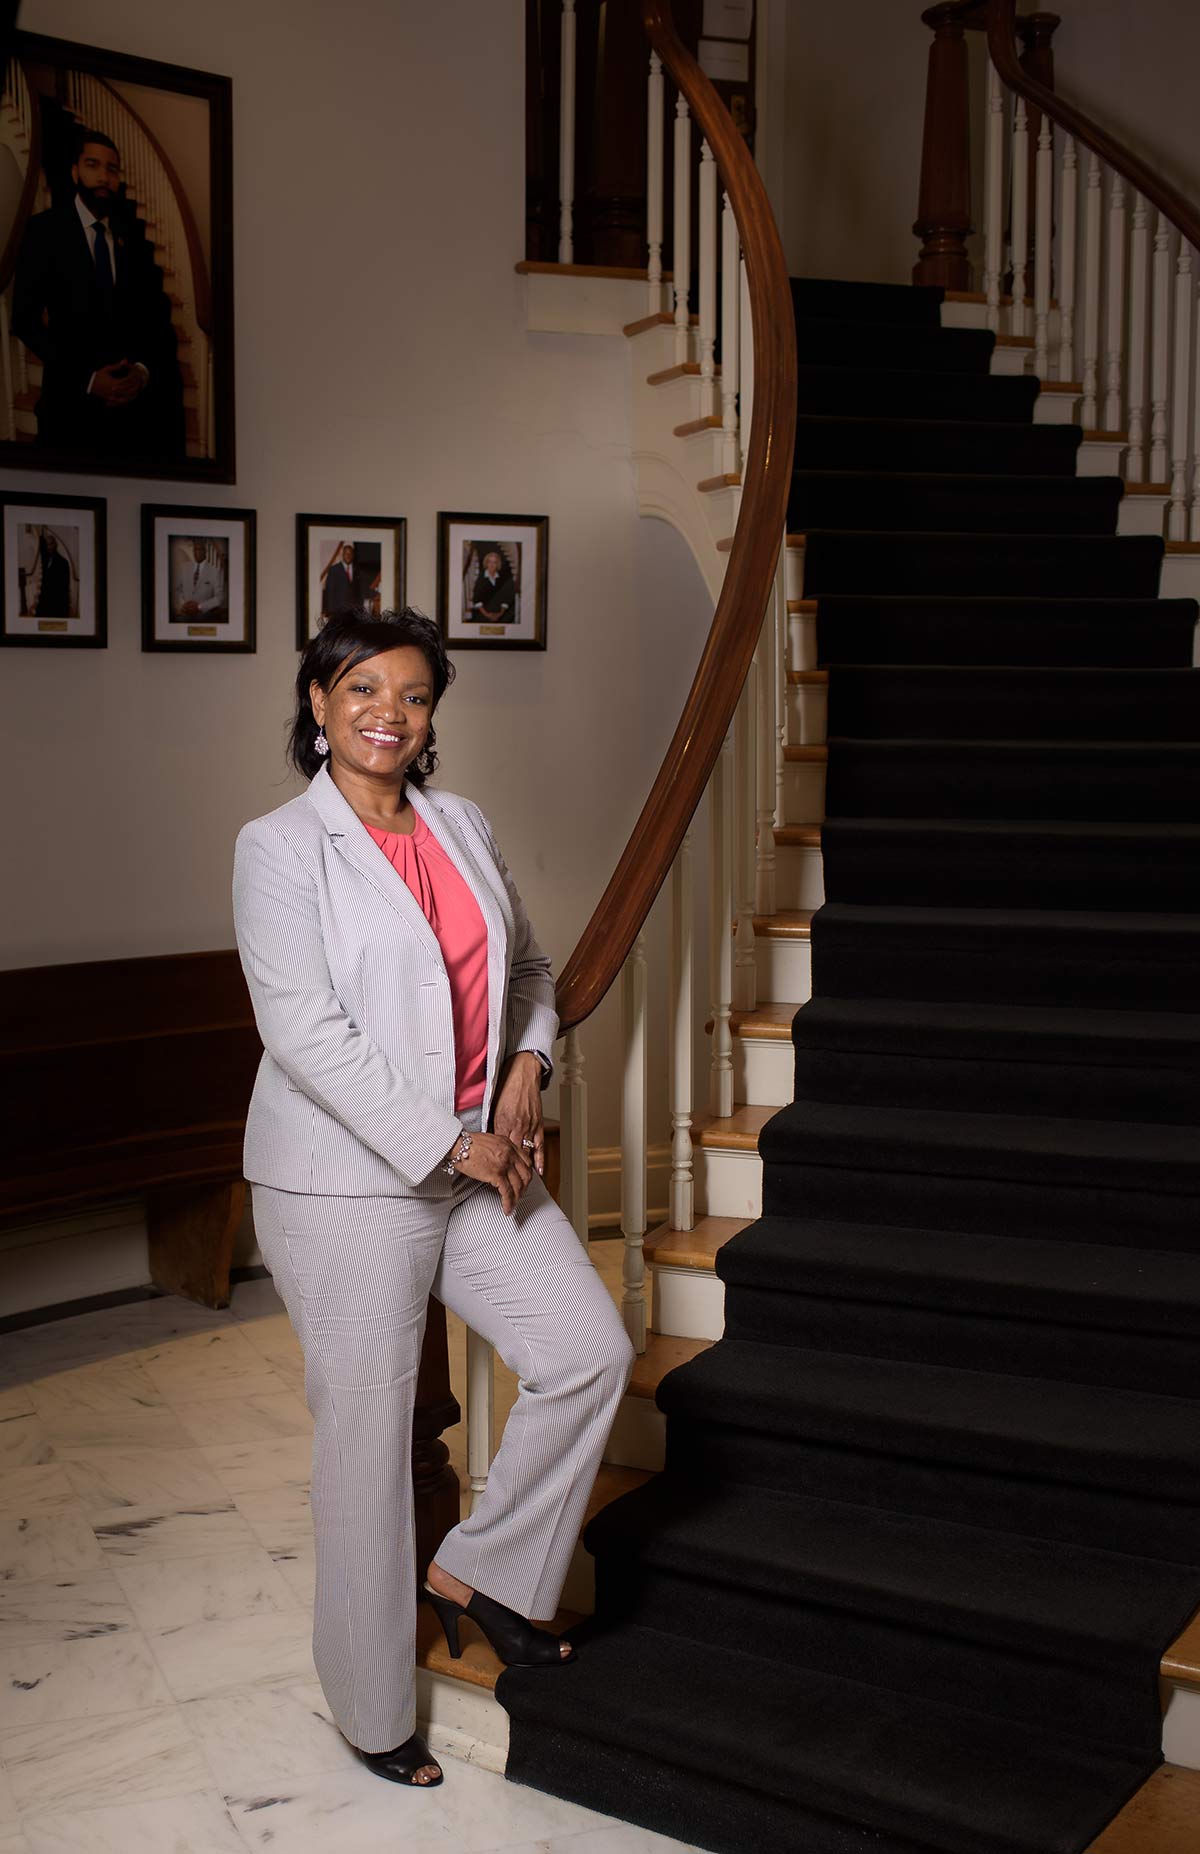 A smiling woman in business attire standing at the bottom of a staircase.